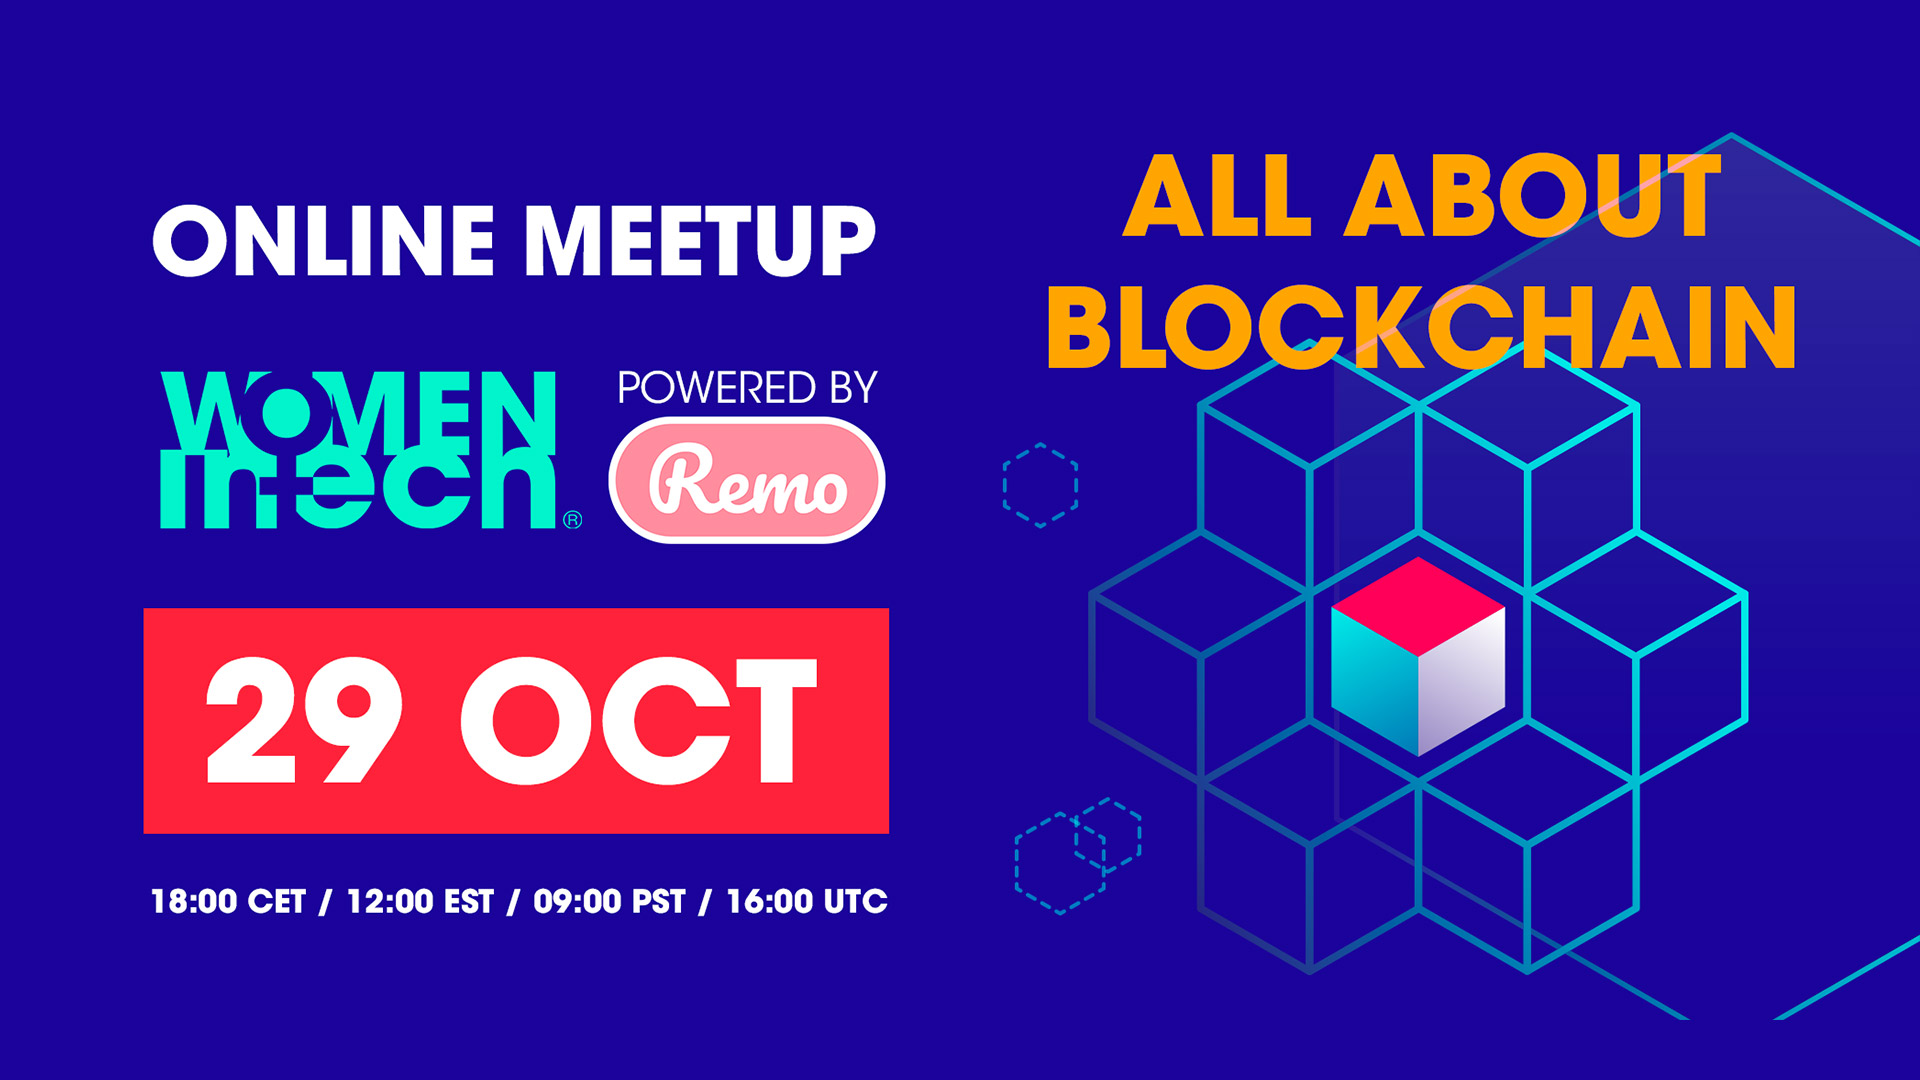 Online meet up: All about blockchain | 29 October 2019